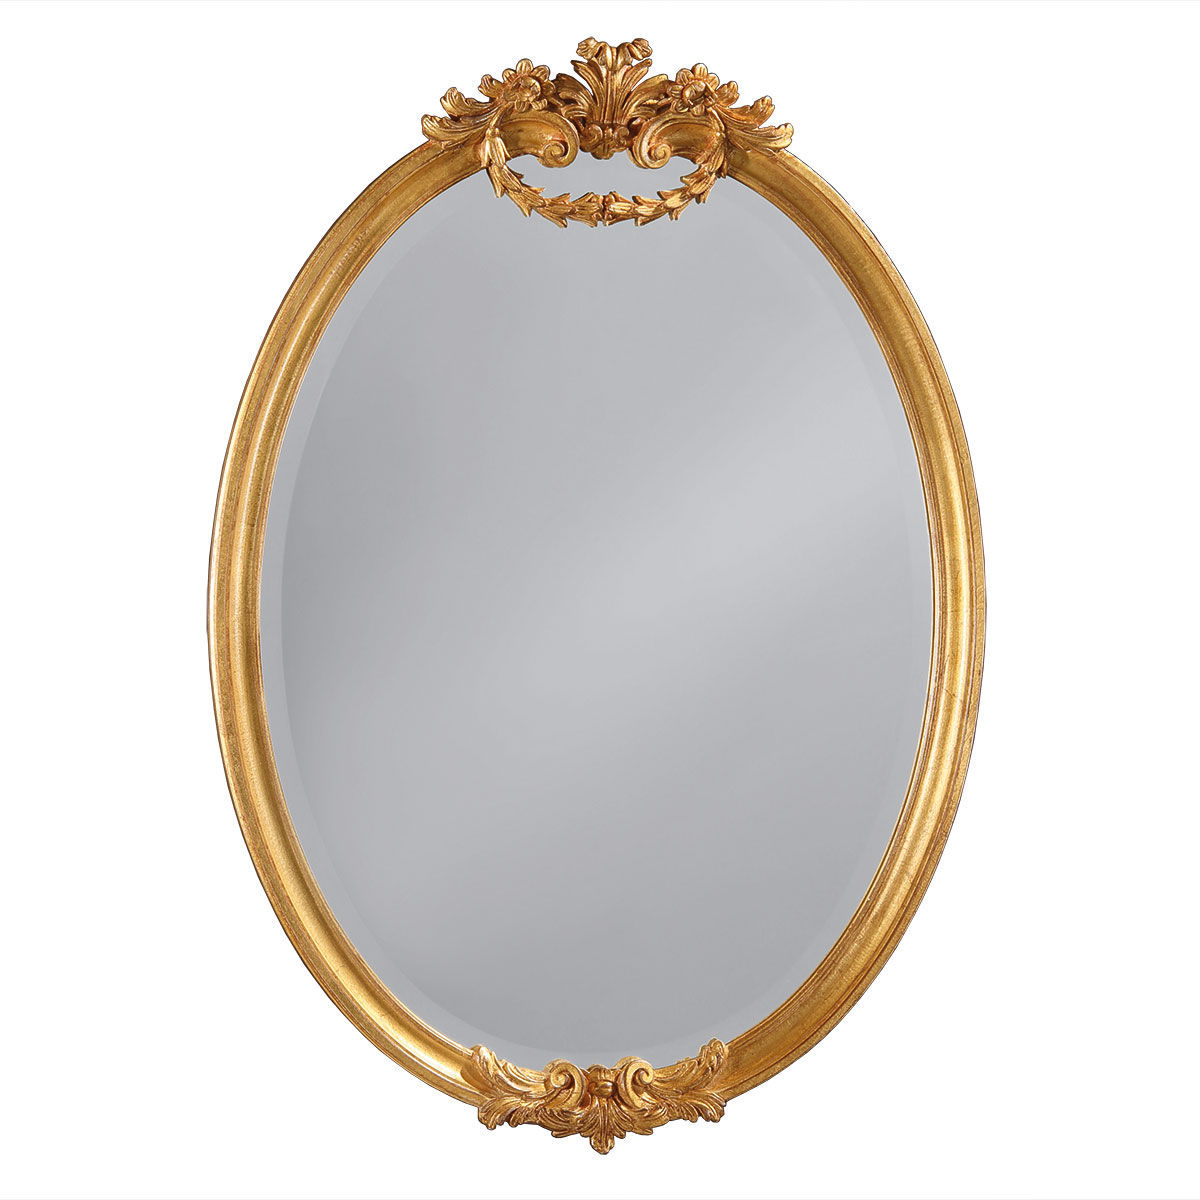 Choosing Mirrors - Things you have to know when choosing a mirror